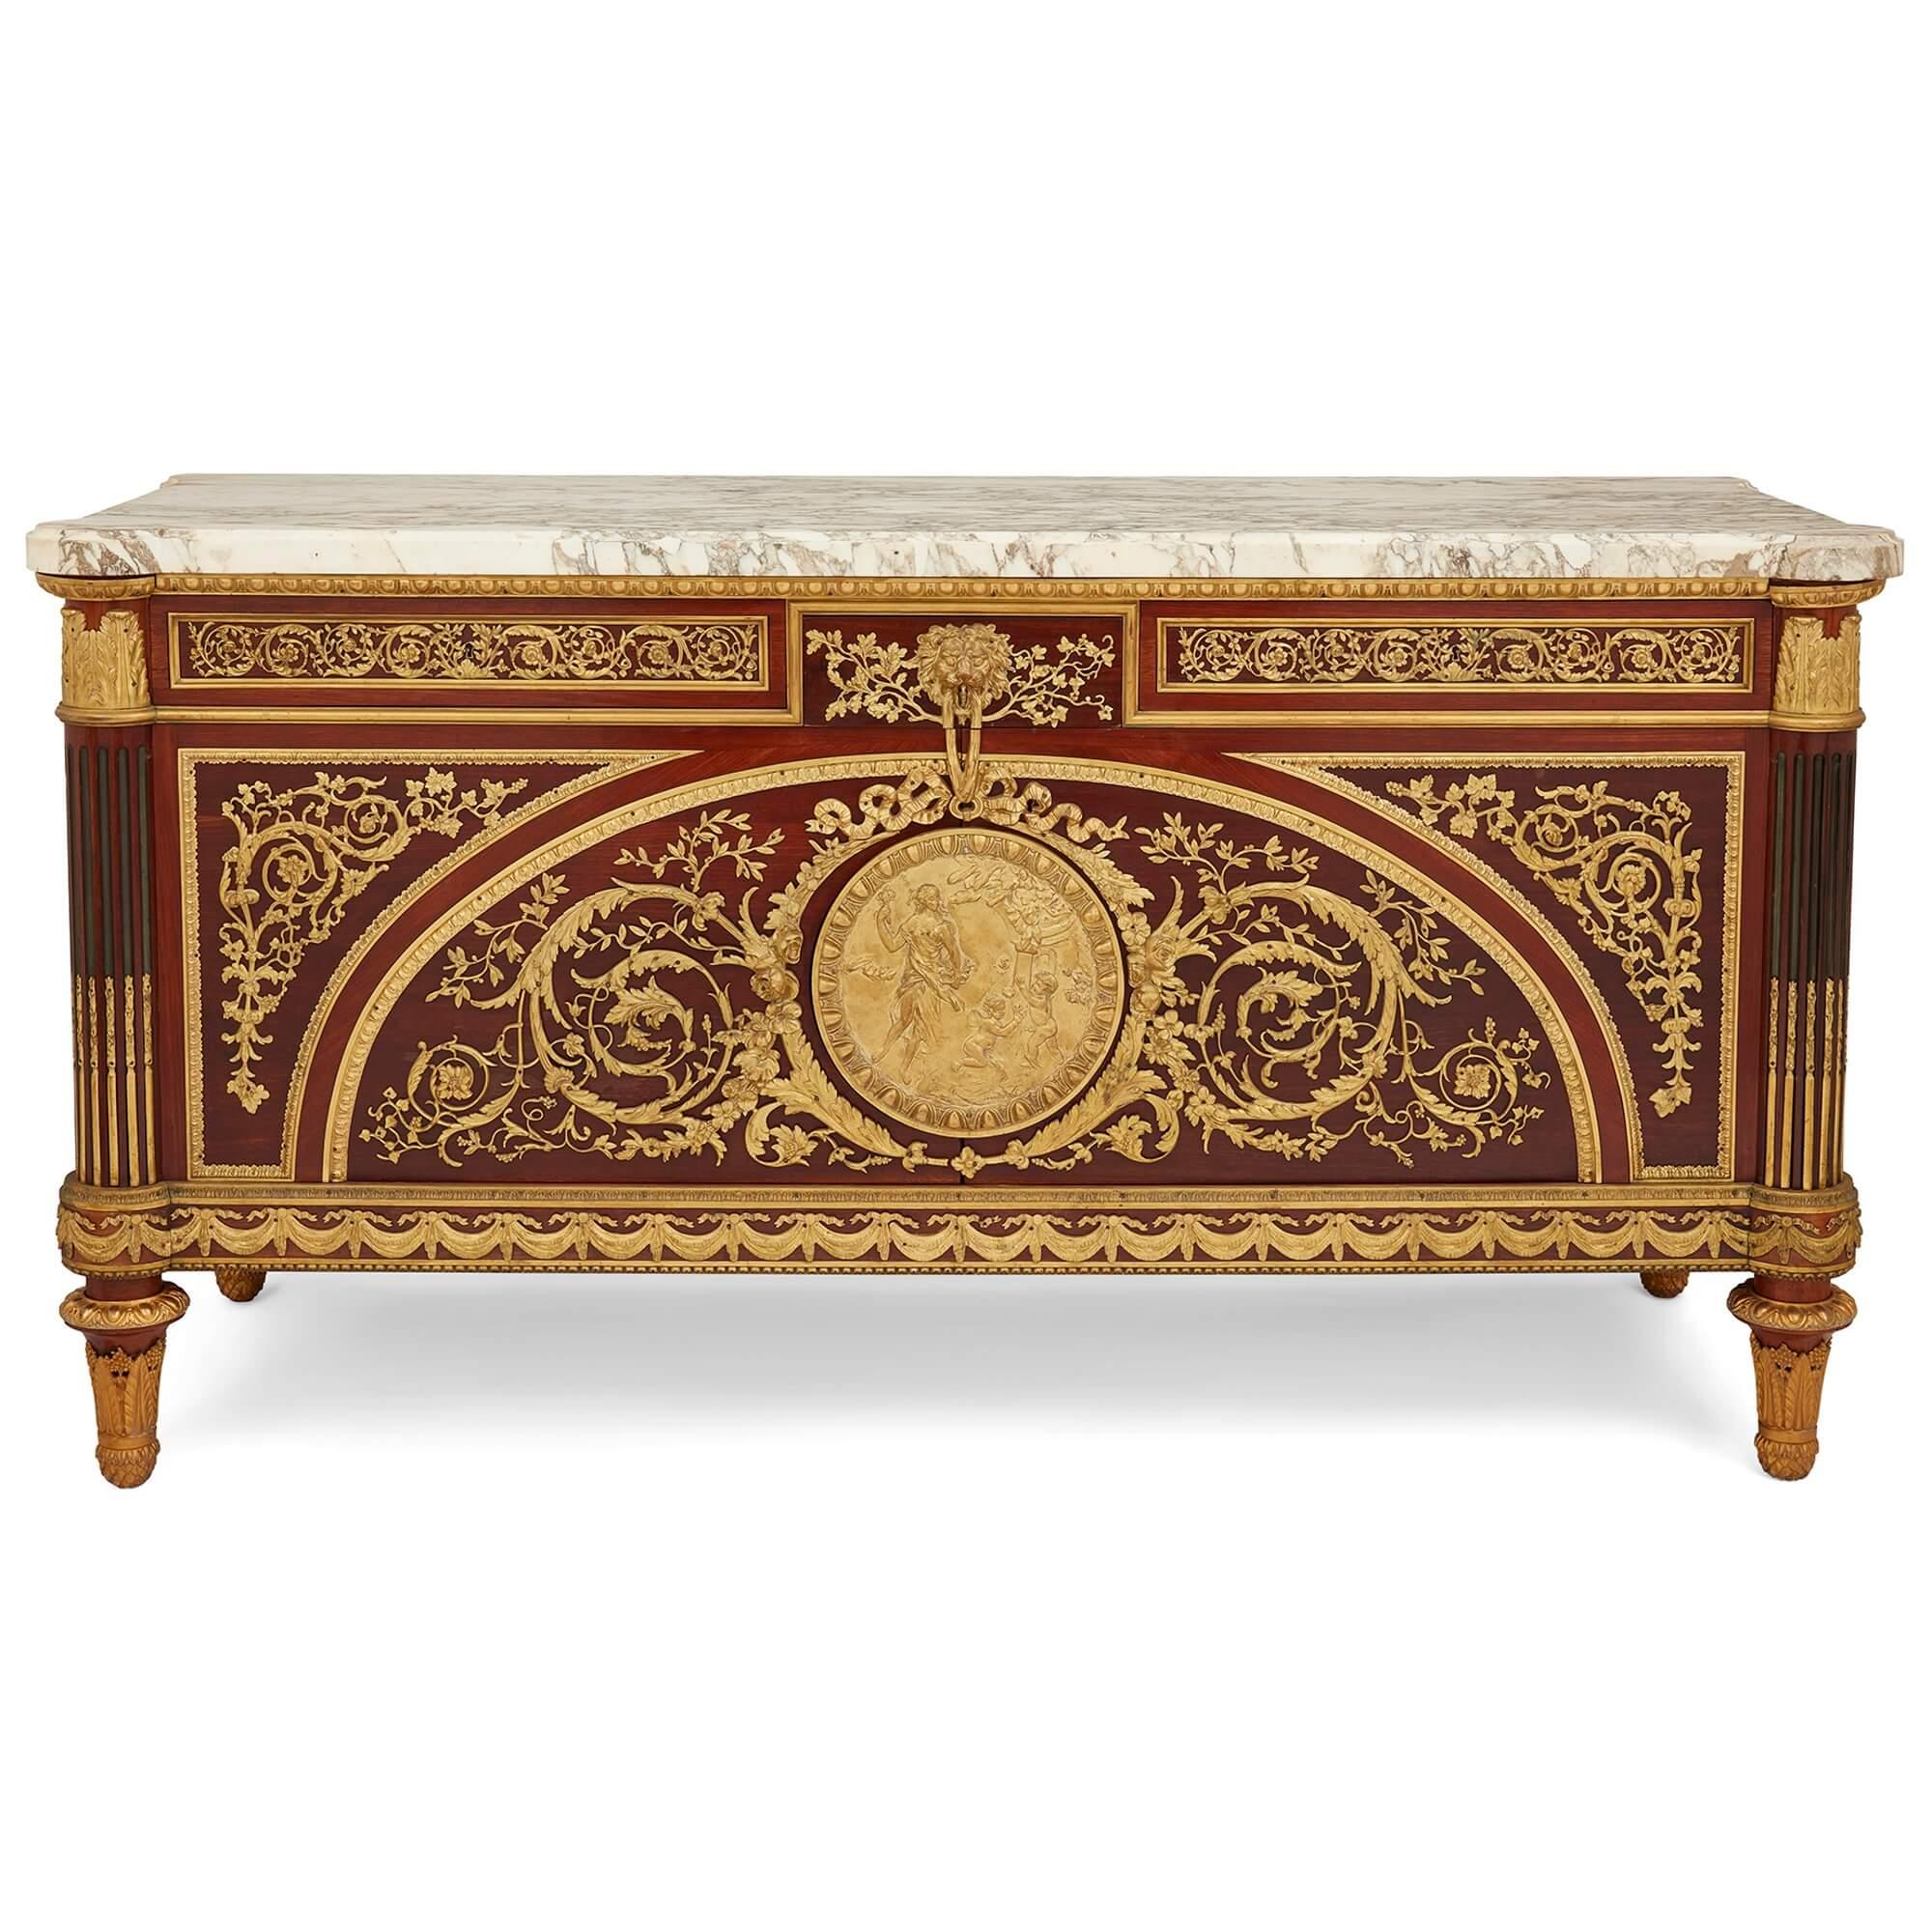 Carved Antique French Louis XVI Style Ormolu-Mounted Commode after Benneman For Sale